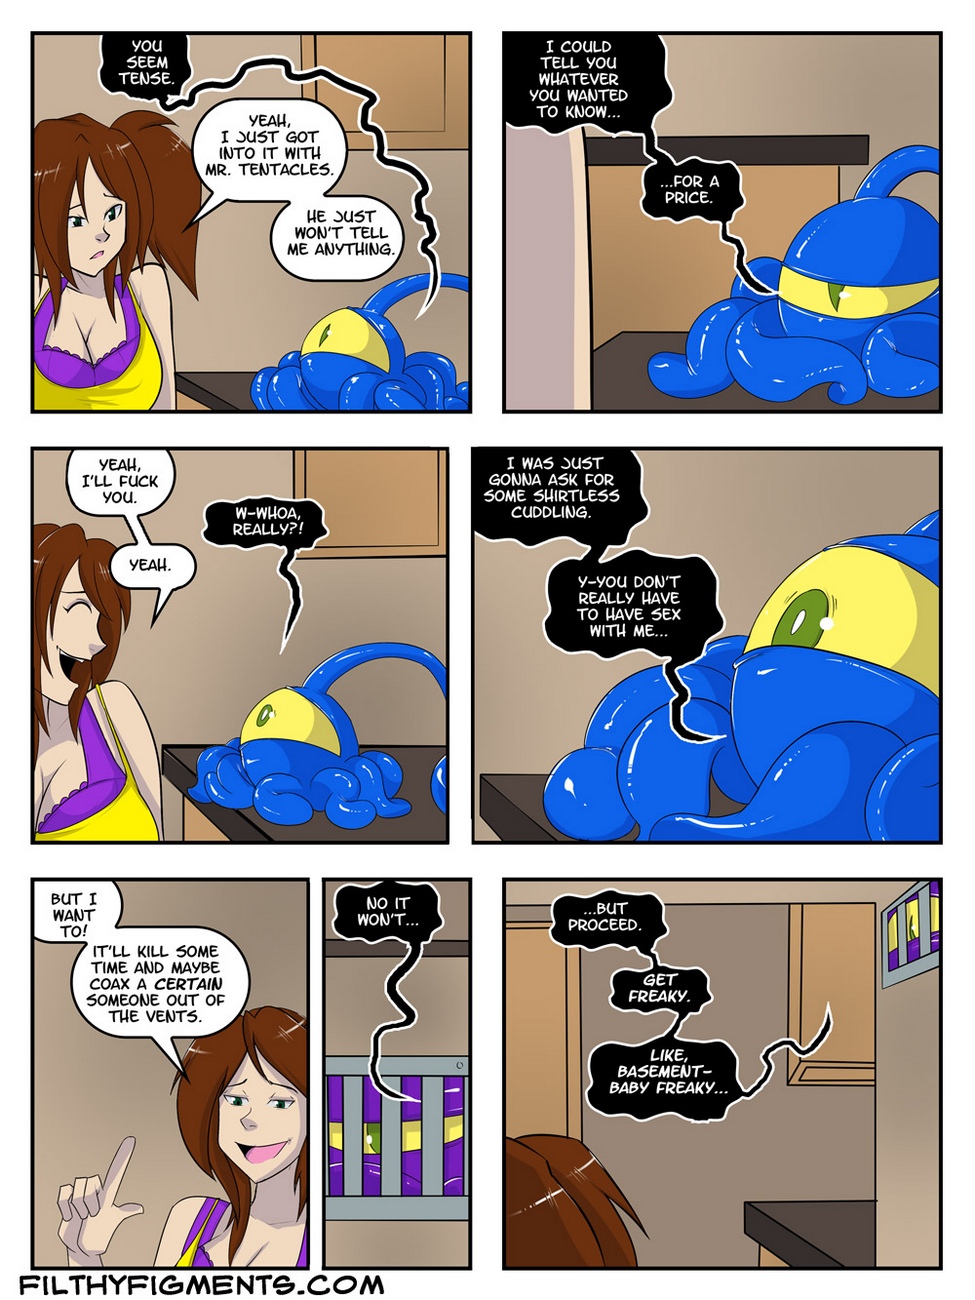 A Date With A Tentacle Monster 11